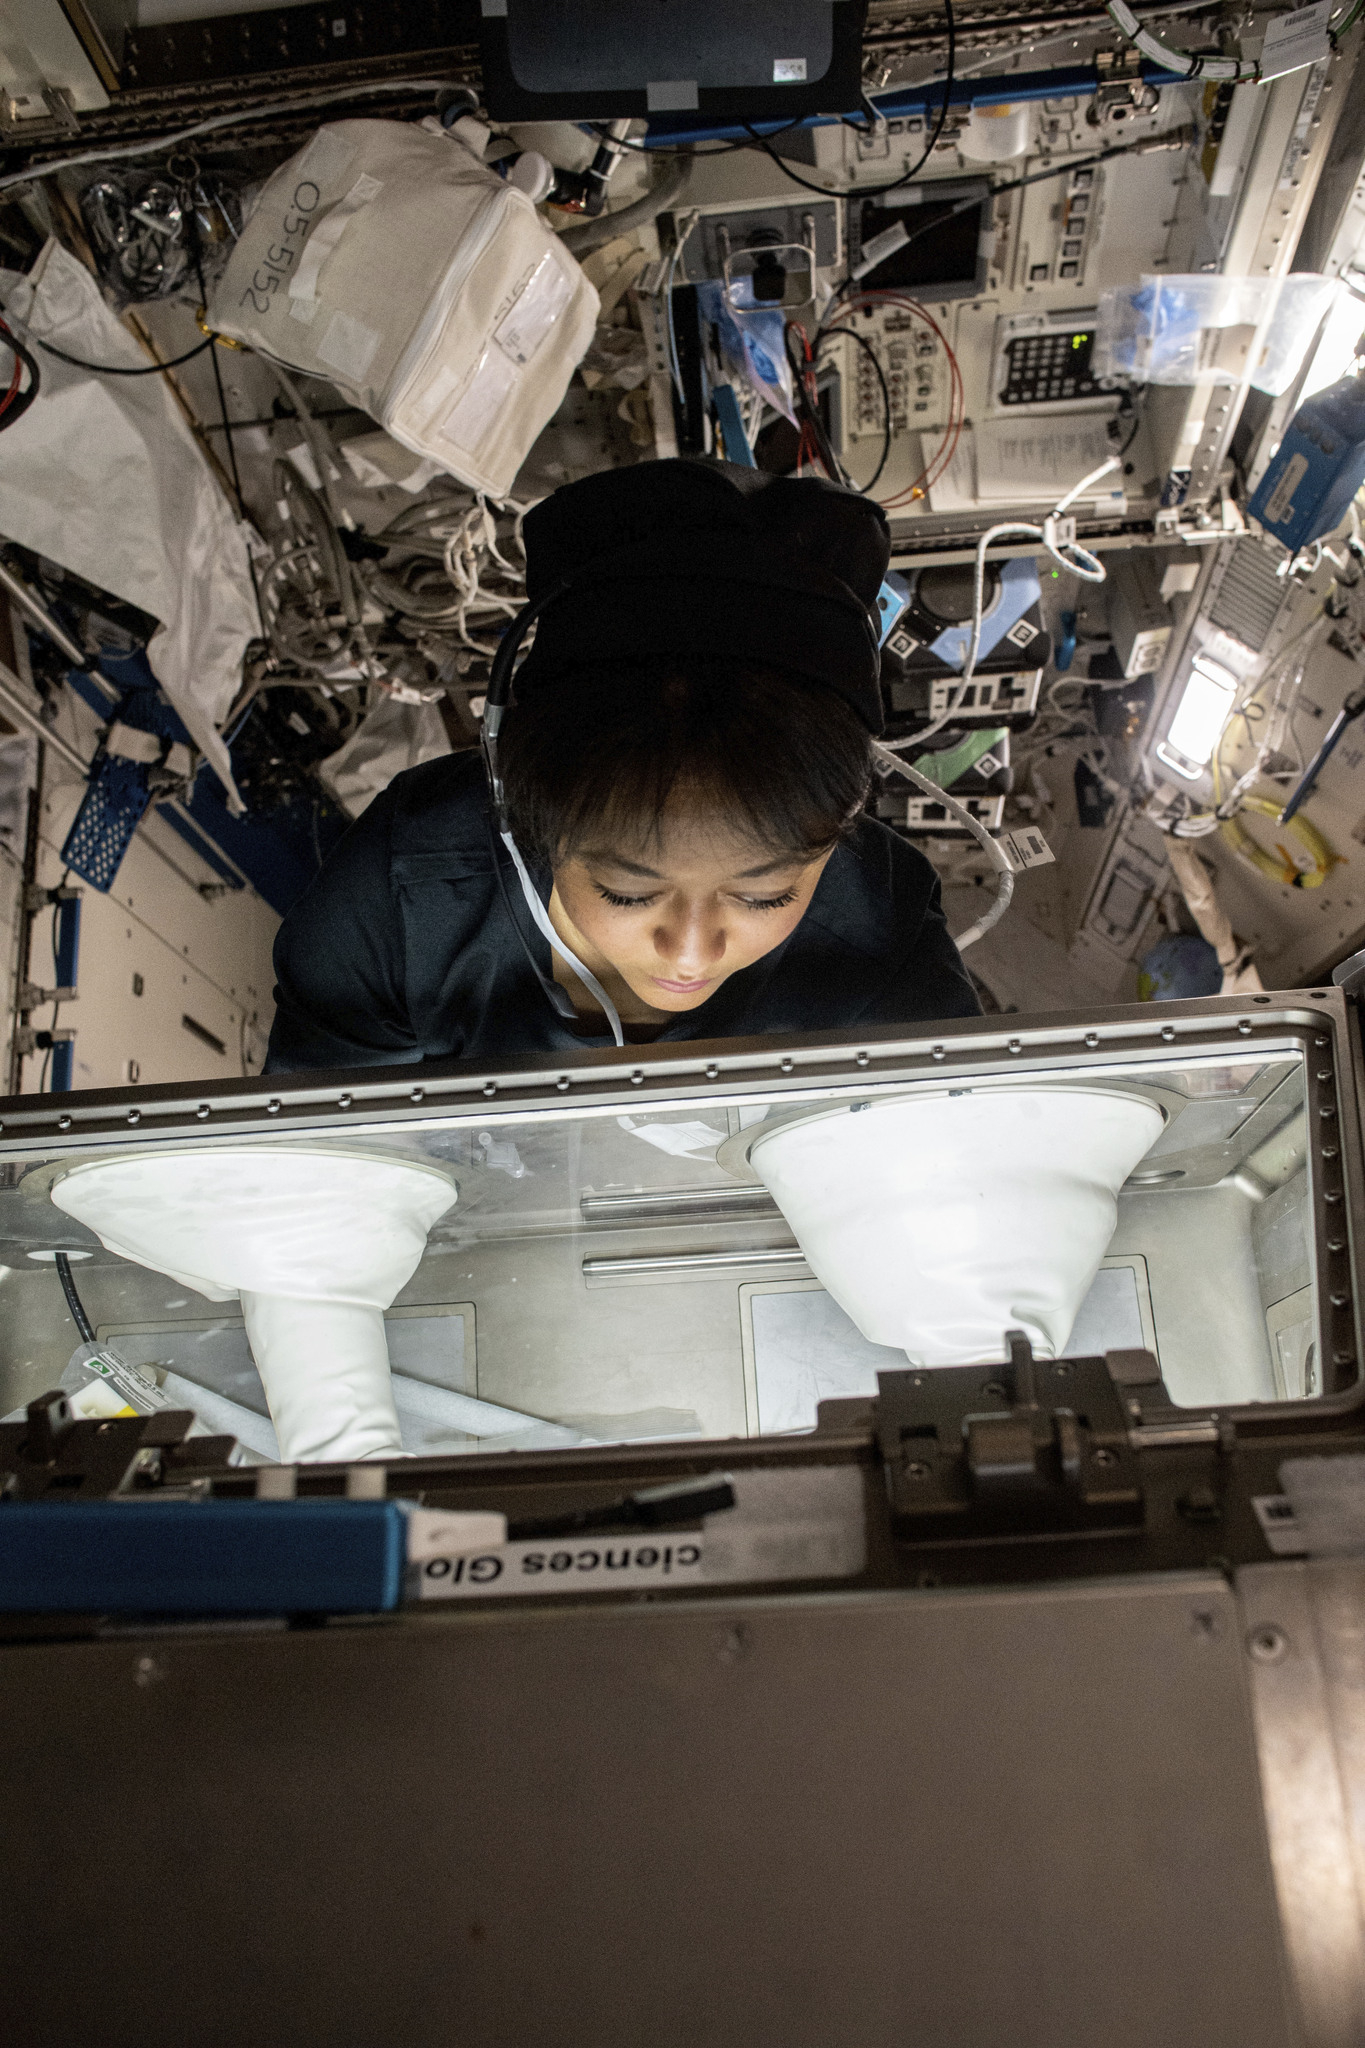 Saudi Space Commission astronaut Rayyanah Barnawi, the first Saudi woman in space, works at a glove box on the international Space Station during her Ax-2 mission.